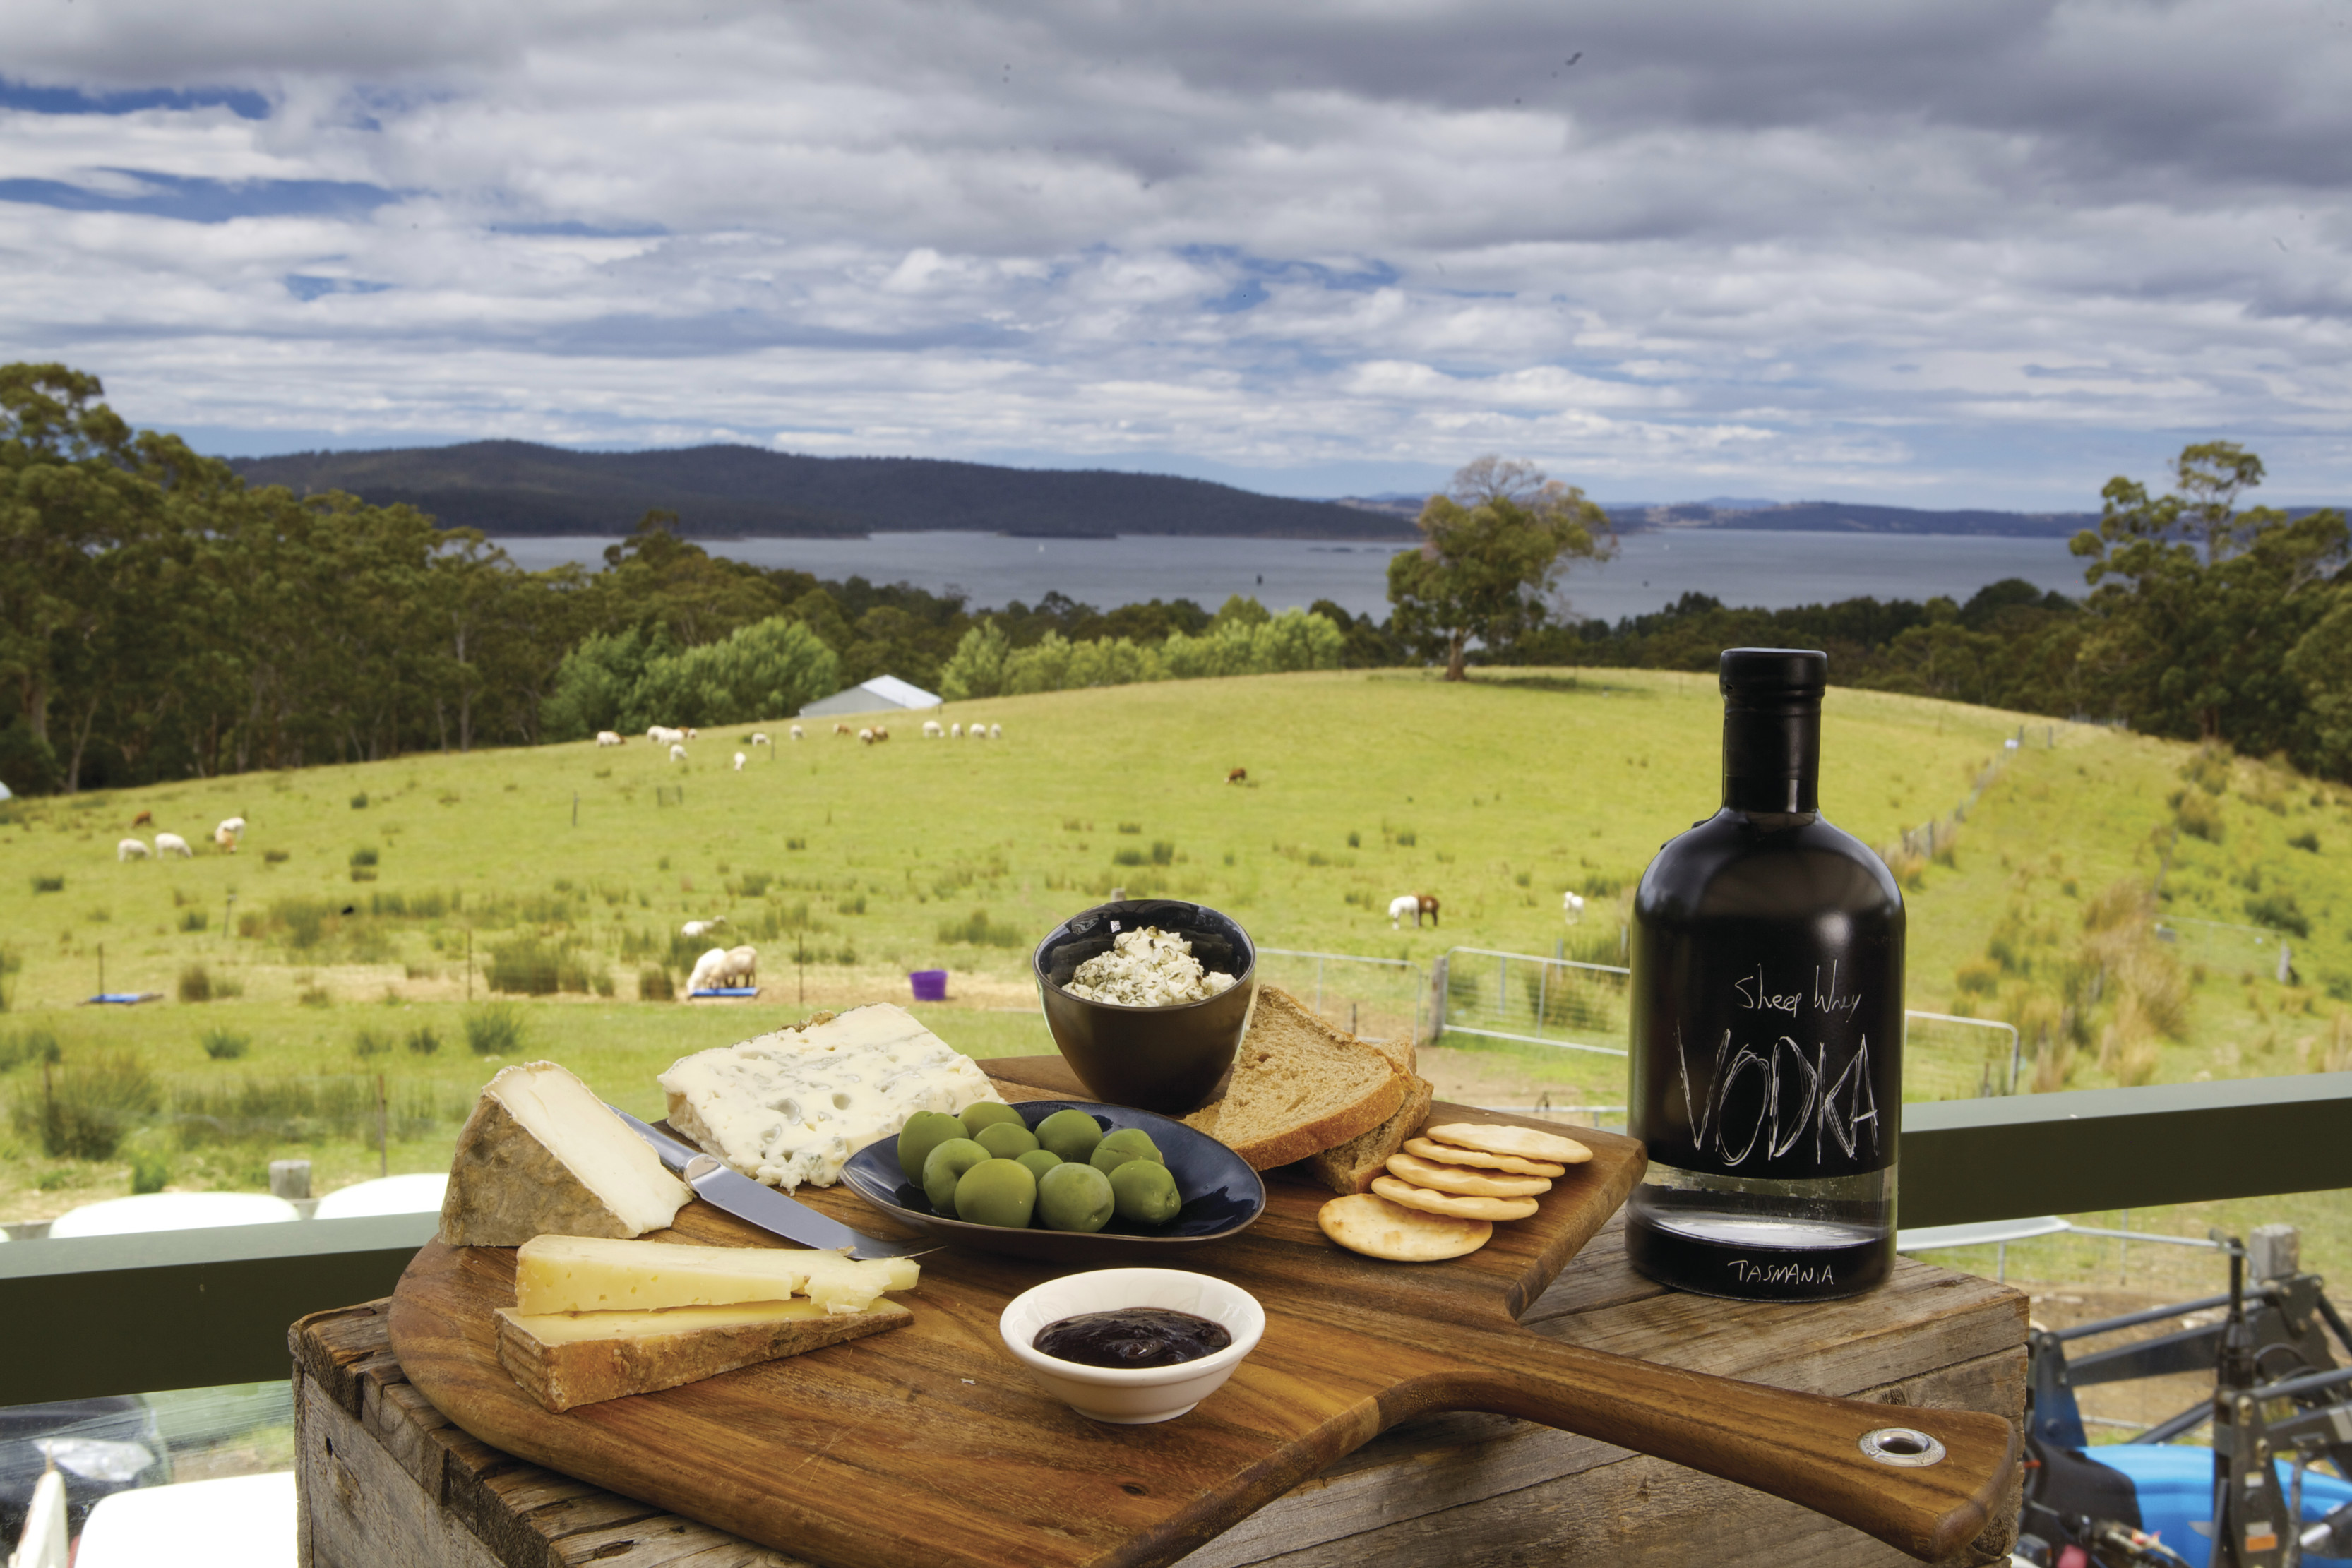 In the foreground, there is a cheese platter on a wooden board with a bottle of vodka. In the background, sheep graze at Grandvewe Cheeses.